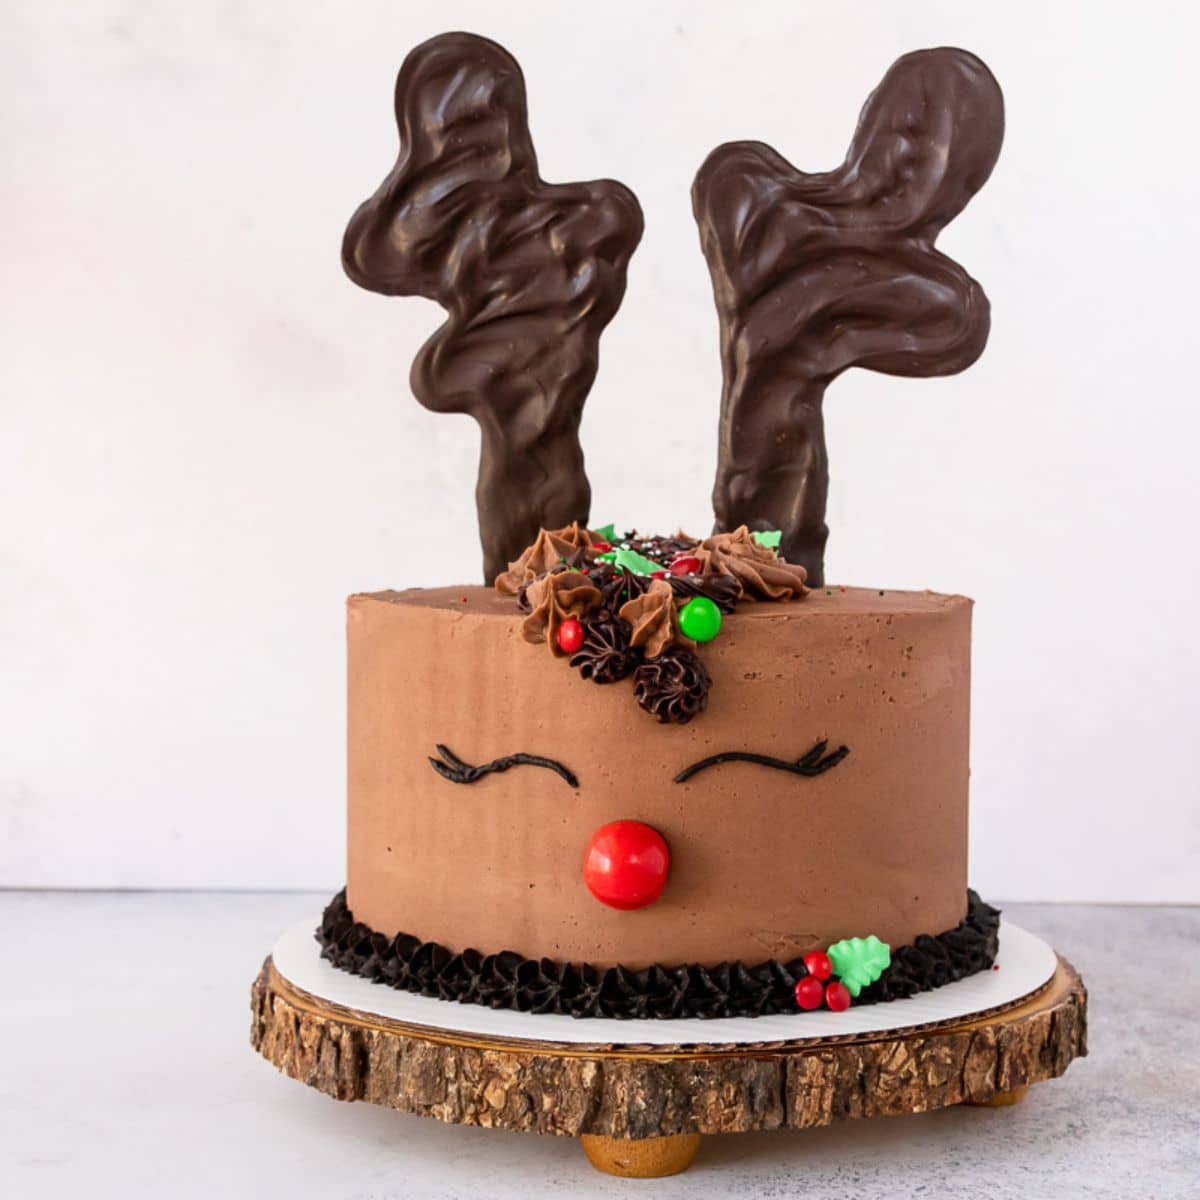 Rudolph-the-Red-Nosed-Reindeer Christmas Cake »